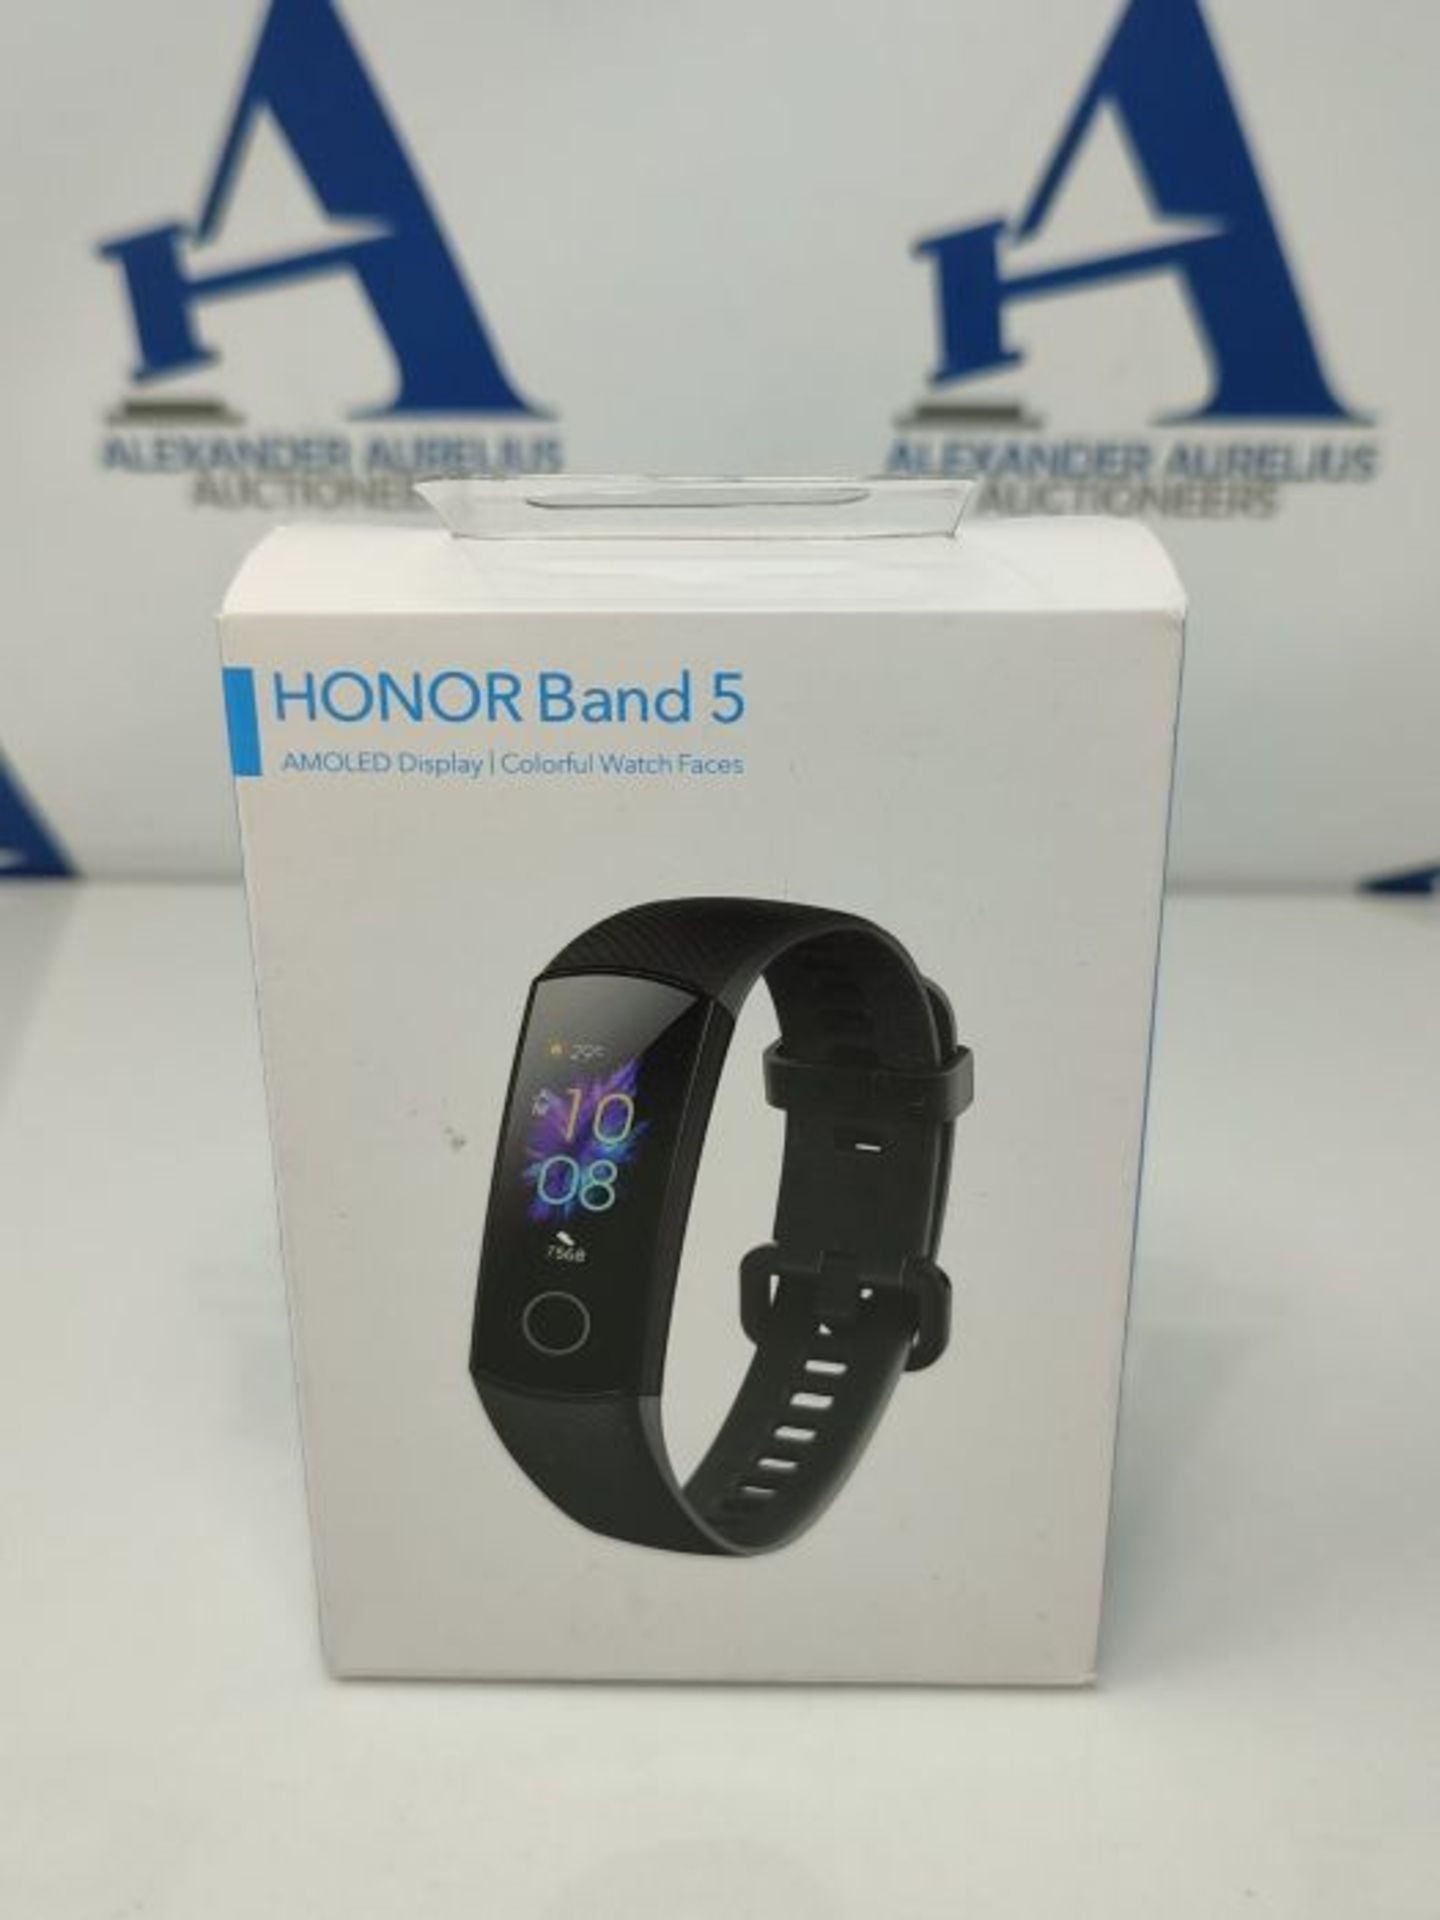 HONOR Band 5 Fitness Bracelet, 0.95 Inch AMOLED Display, Tracker with Heart Rate Monit - Image 2 of 3